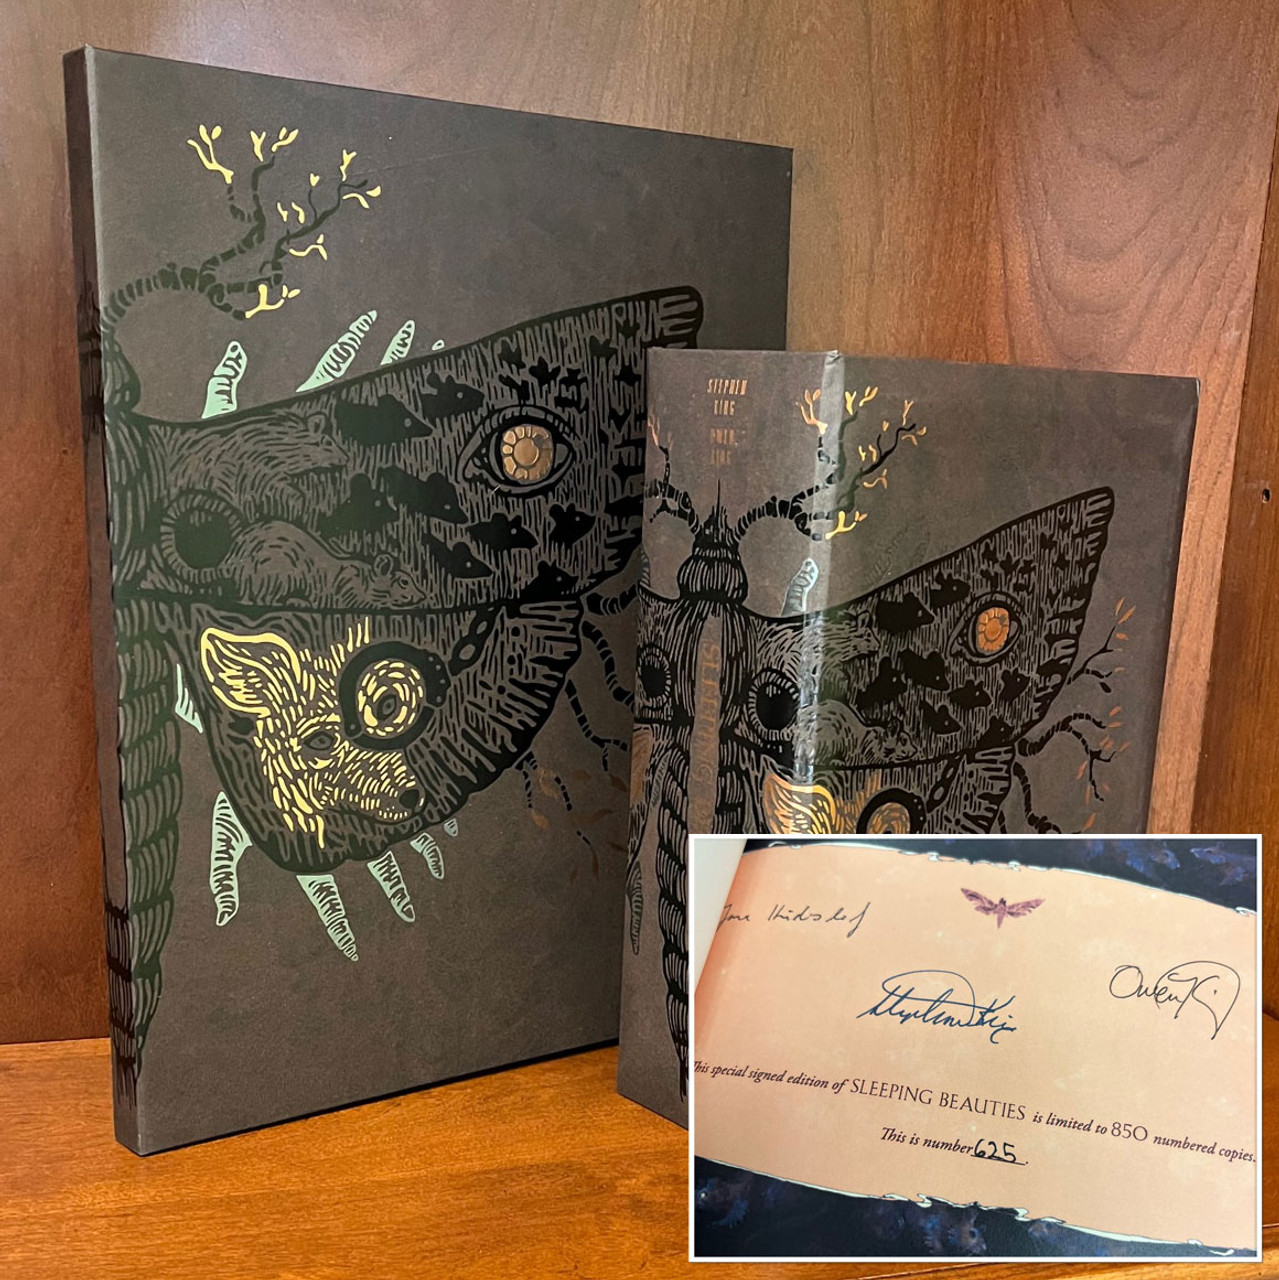 Stephen King and Owen King "Sleeping Beauties" Traycased Signed Limited Edition No. 625 of 850 w/Artwork Portfolio S/L No. 251 of 850 [Very Fine]